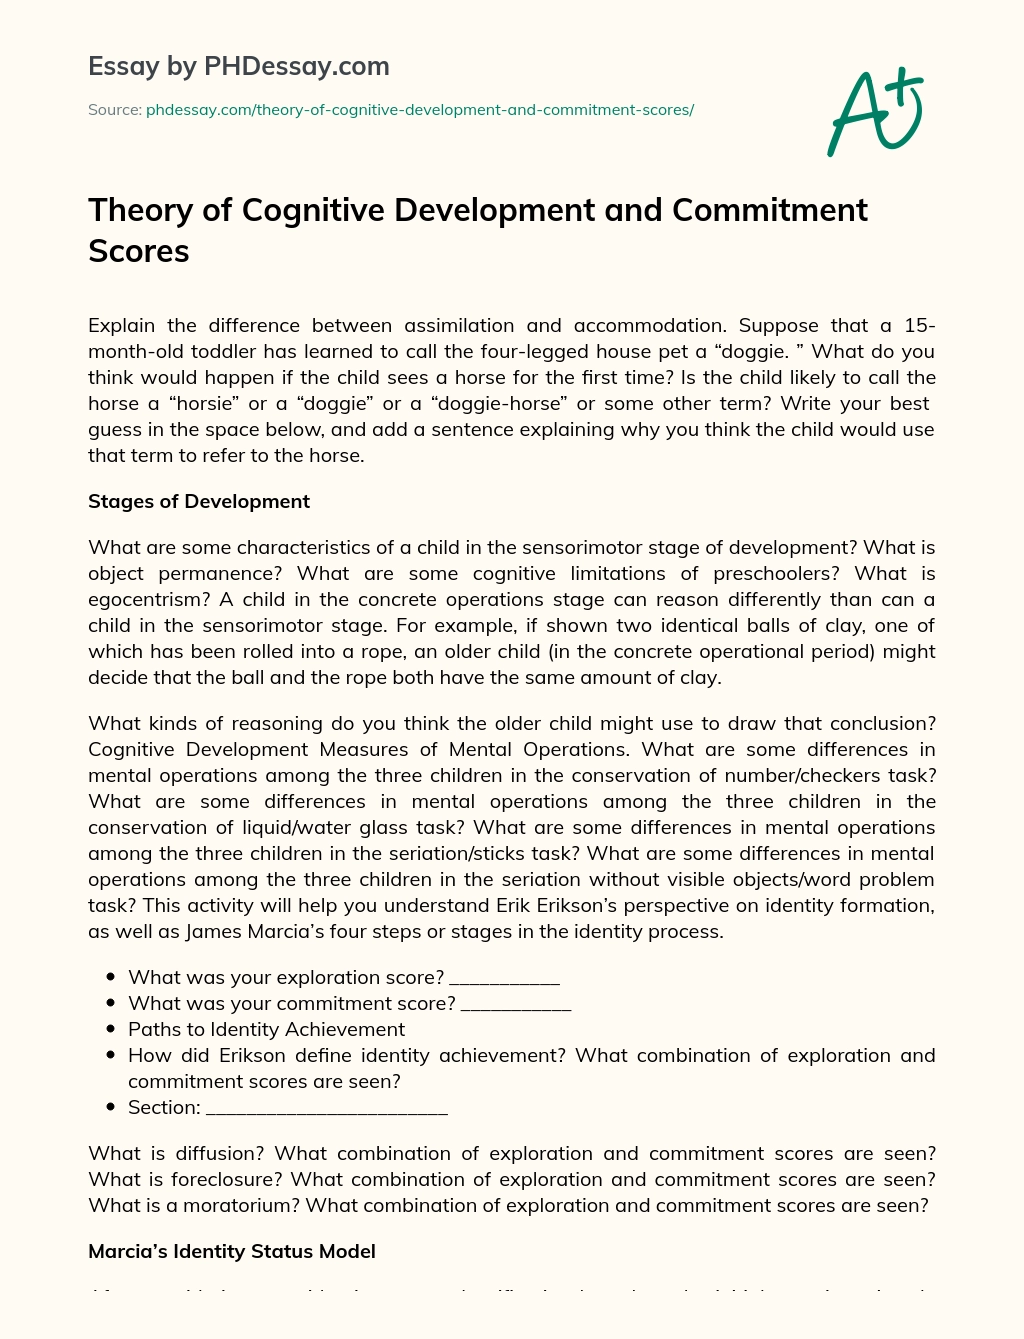 Theory of Cognitive Development and Commitment Scores essay